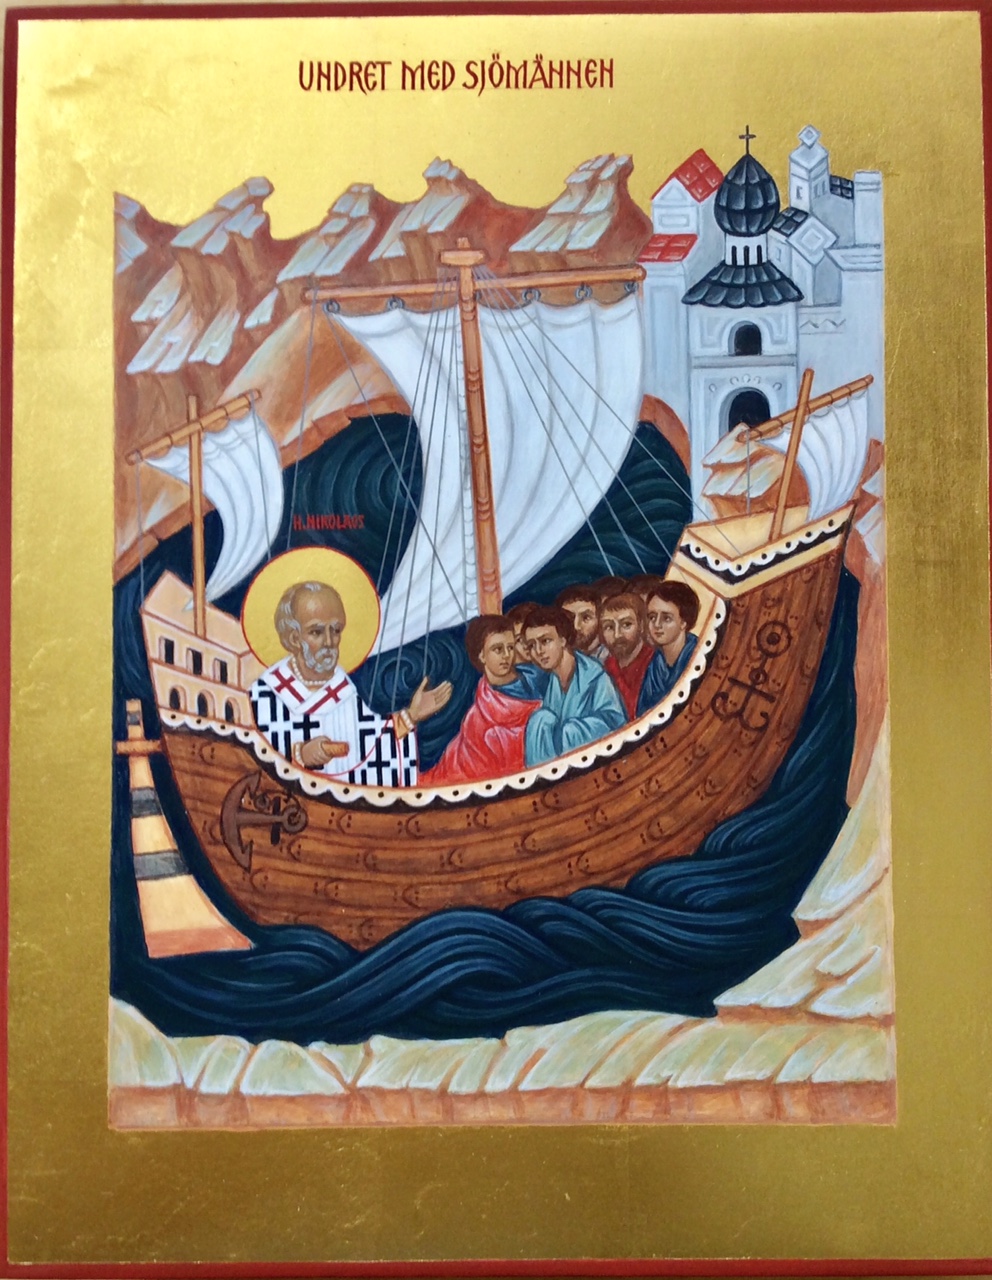 The miracle with St. Nicholas and the sailors